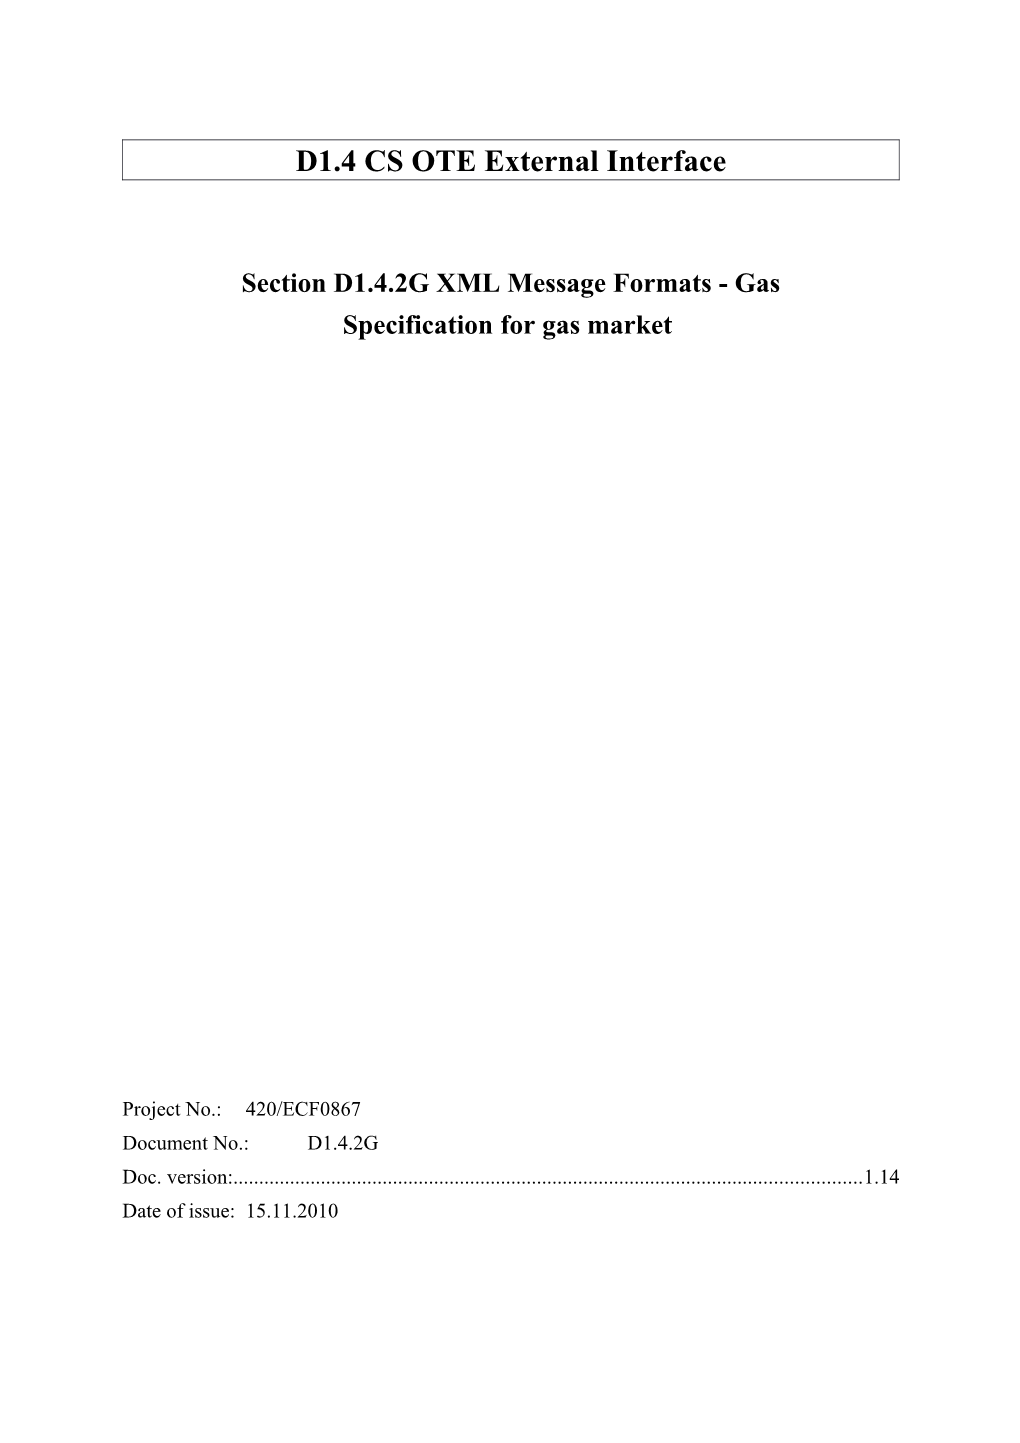 Section D1.4.2G XML Message Formats - Gas